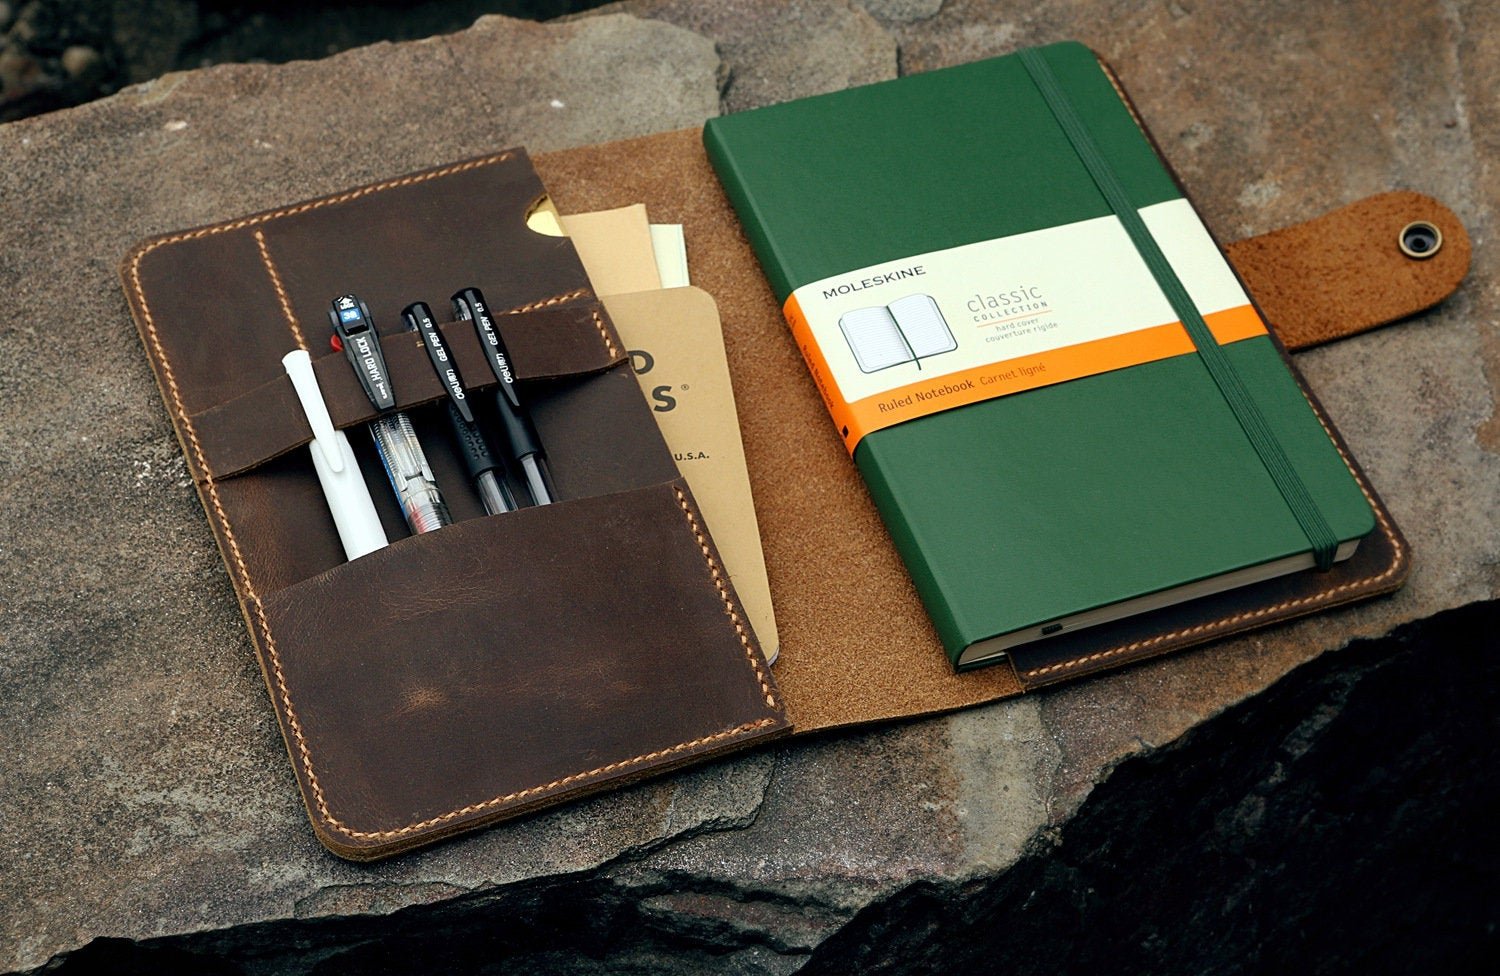 https://cdn.shopify.com/s/files/1/1794/7261/products/personalized-leather-moleskine-cover-with-pen-holder-713333.jpg?v=1696127748